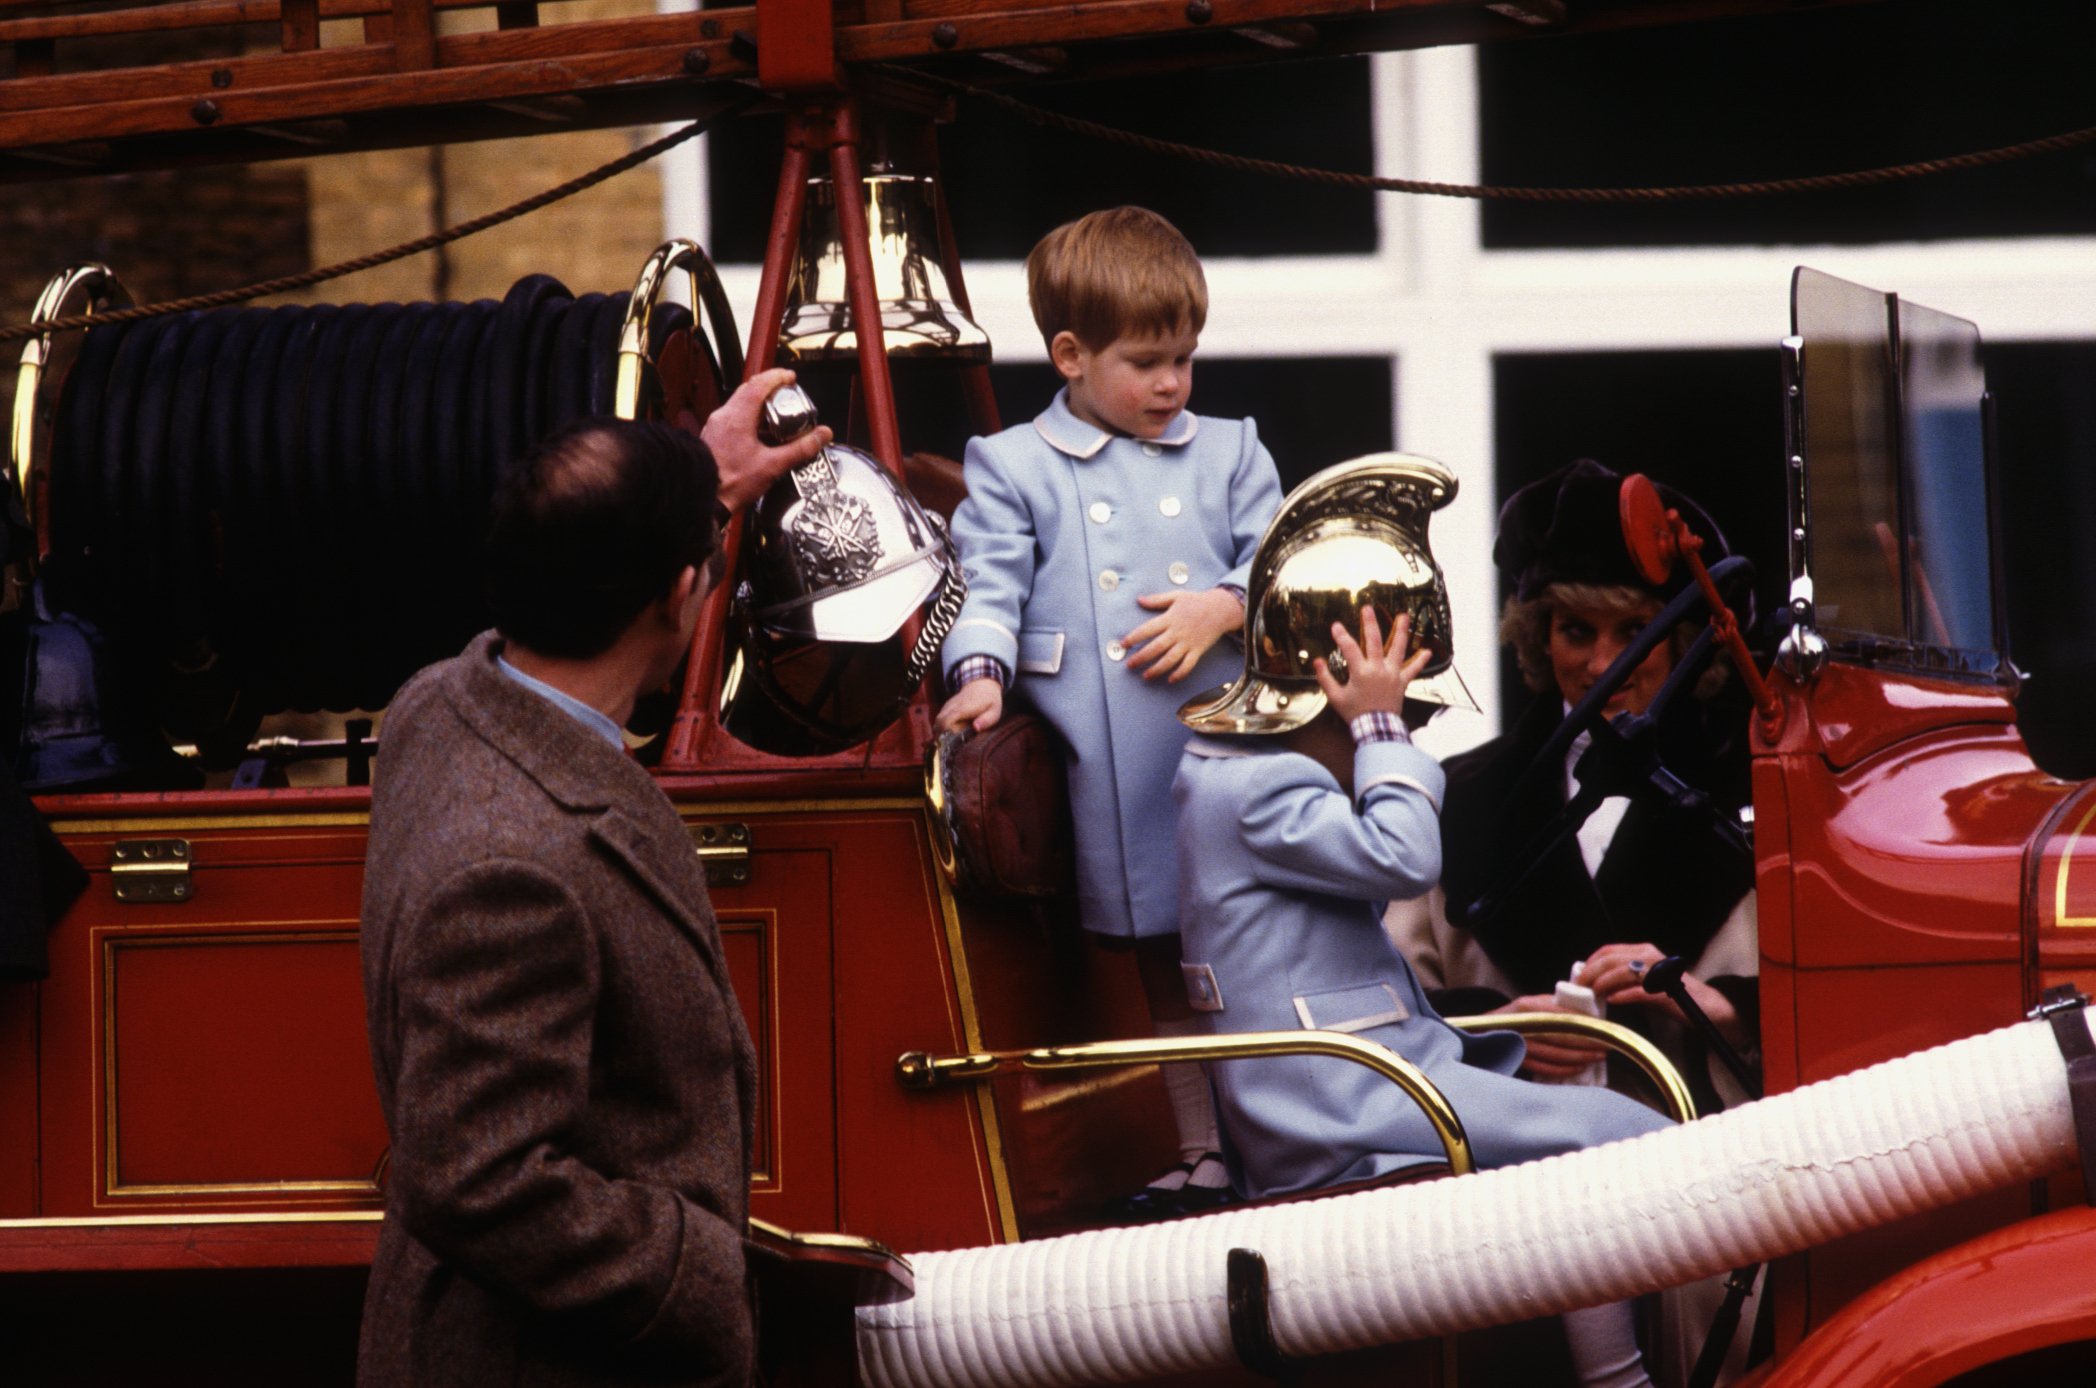 Prince Charles and his wife, Princess Diana, with their sons Prince Harry and Prince William who are pictured playing on a vintage fire engine at Sandringham. | Source: Getty Images